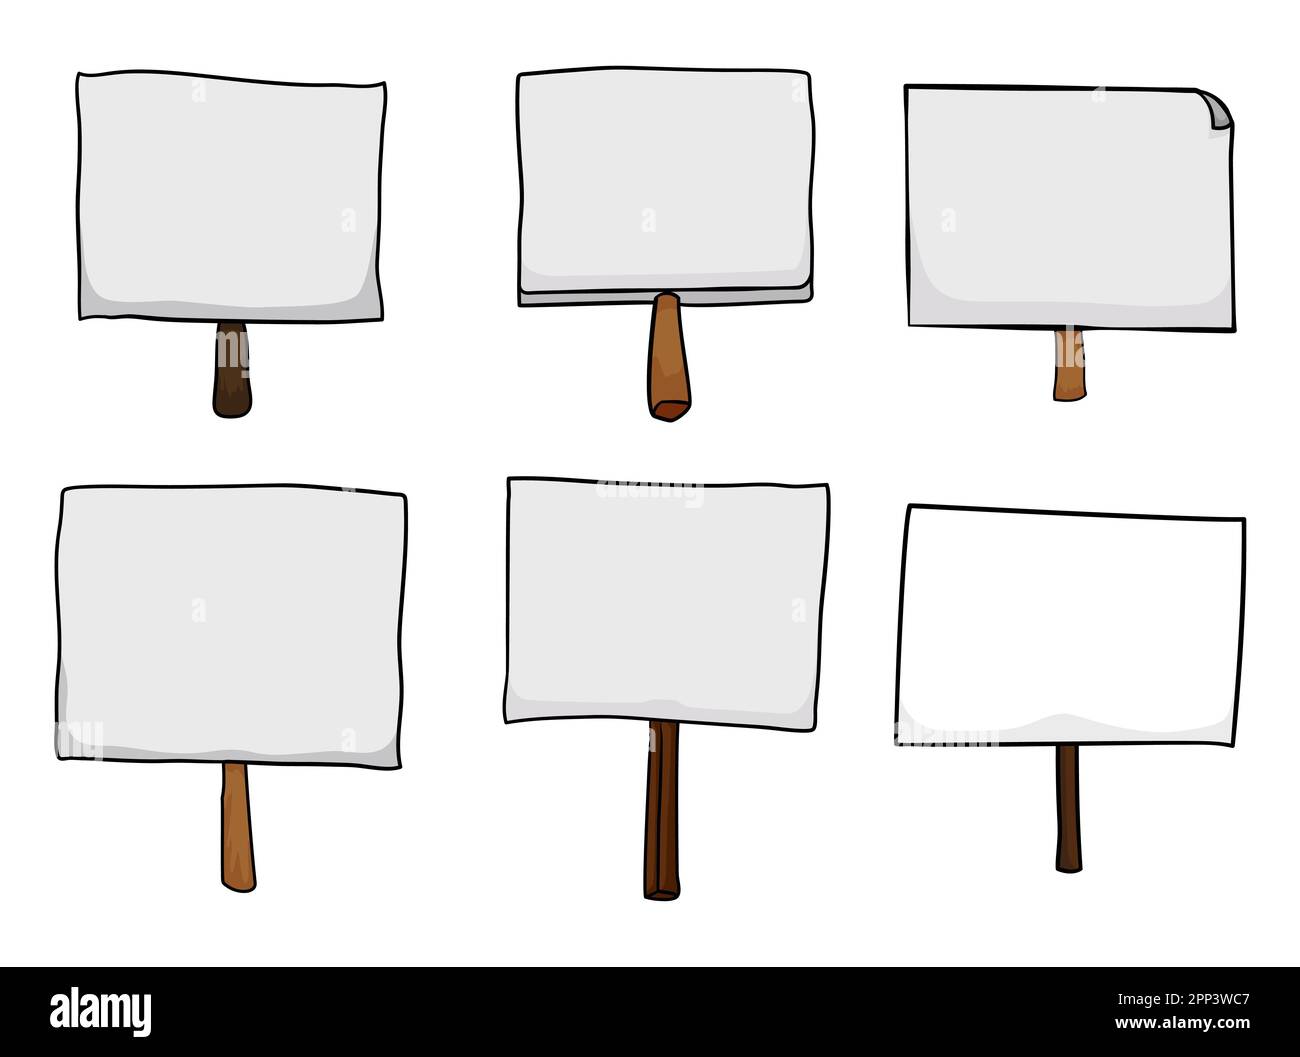 Group of six banners or placards with wooden handle in cartoon style. Templates on white background. Stock Vector